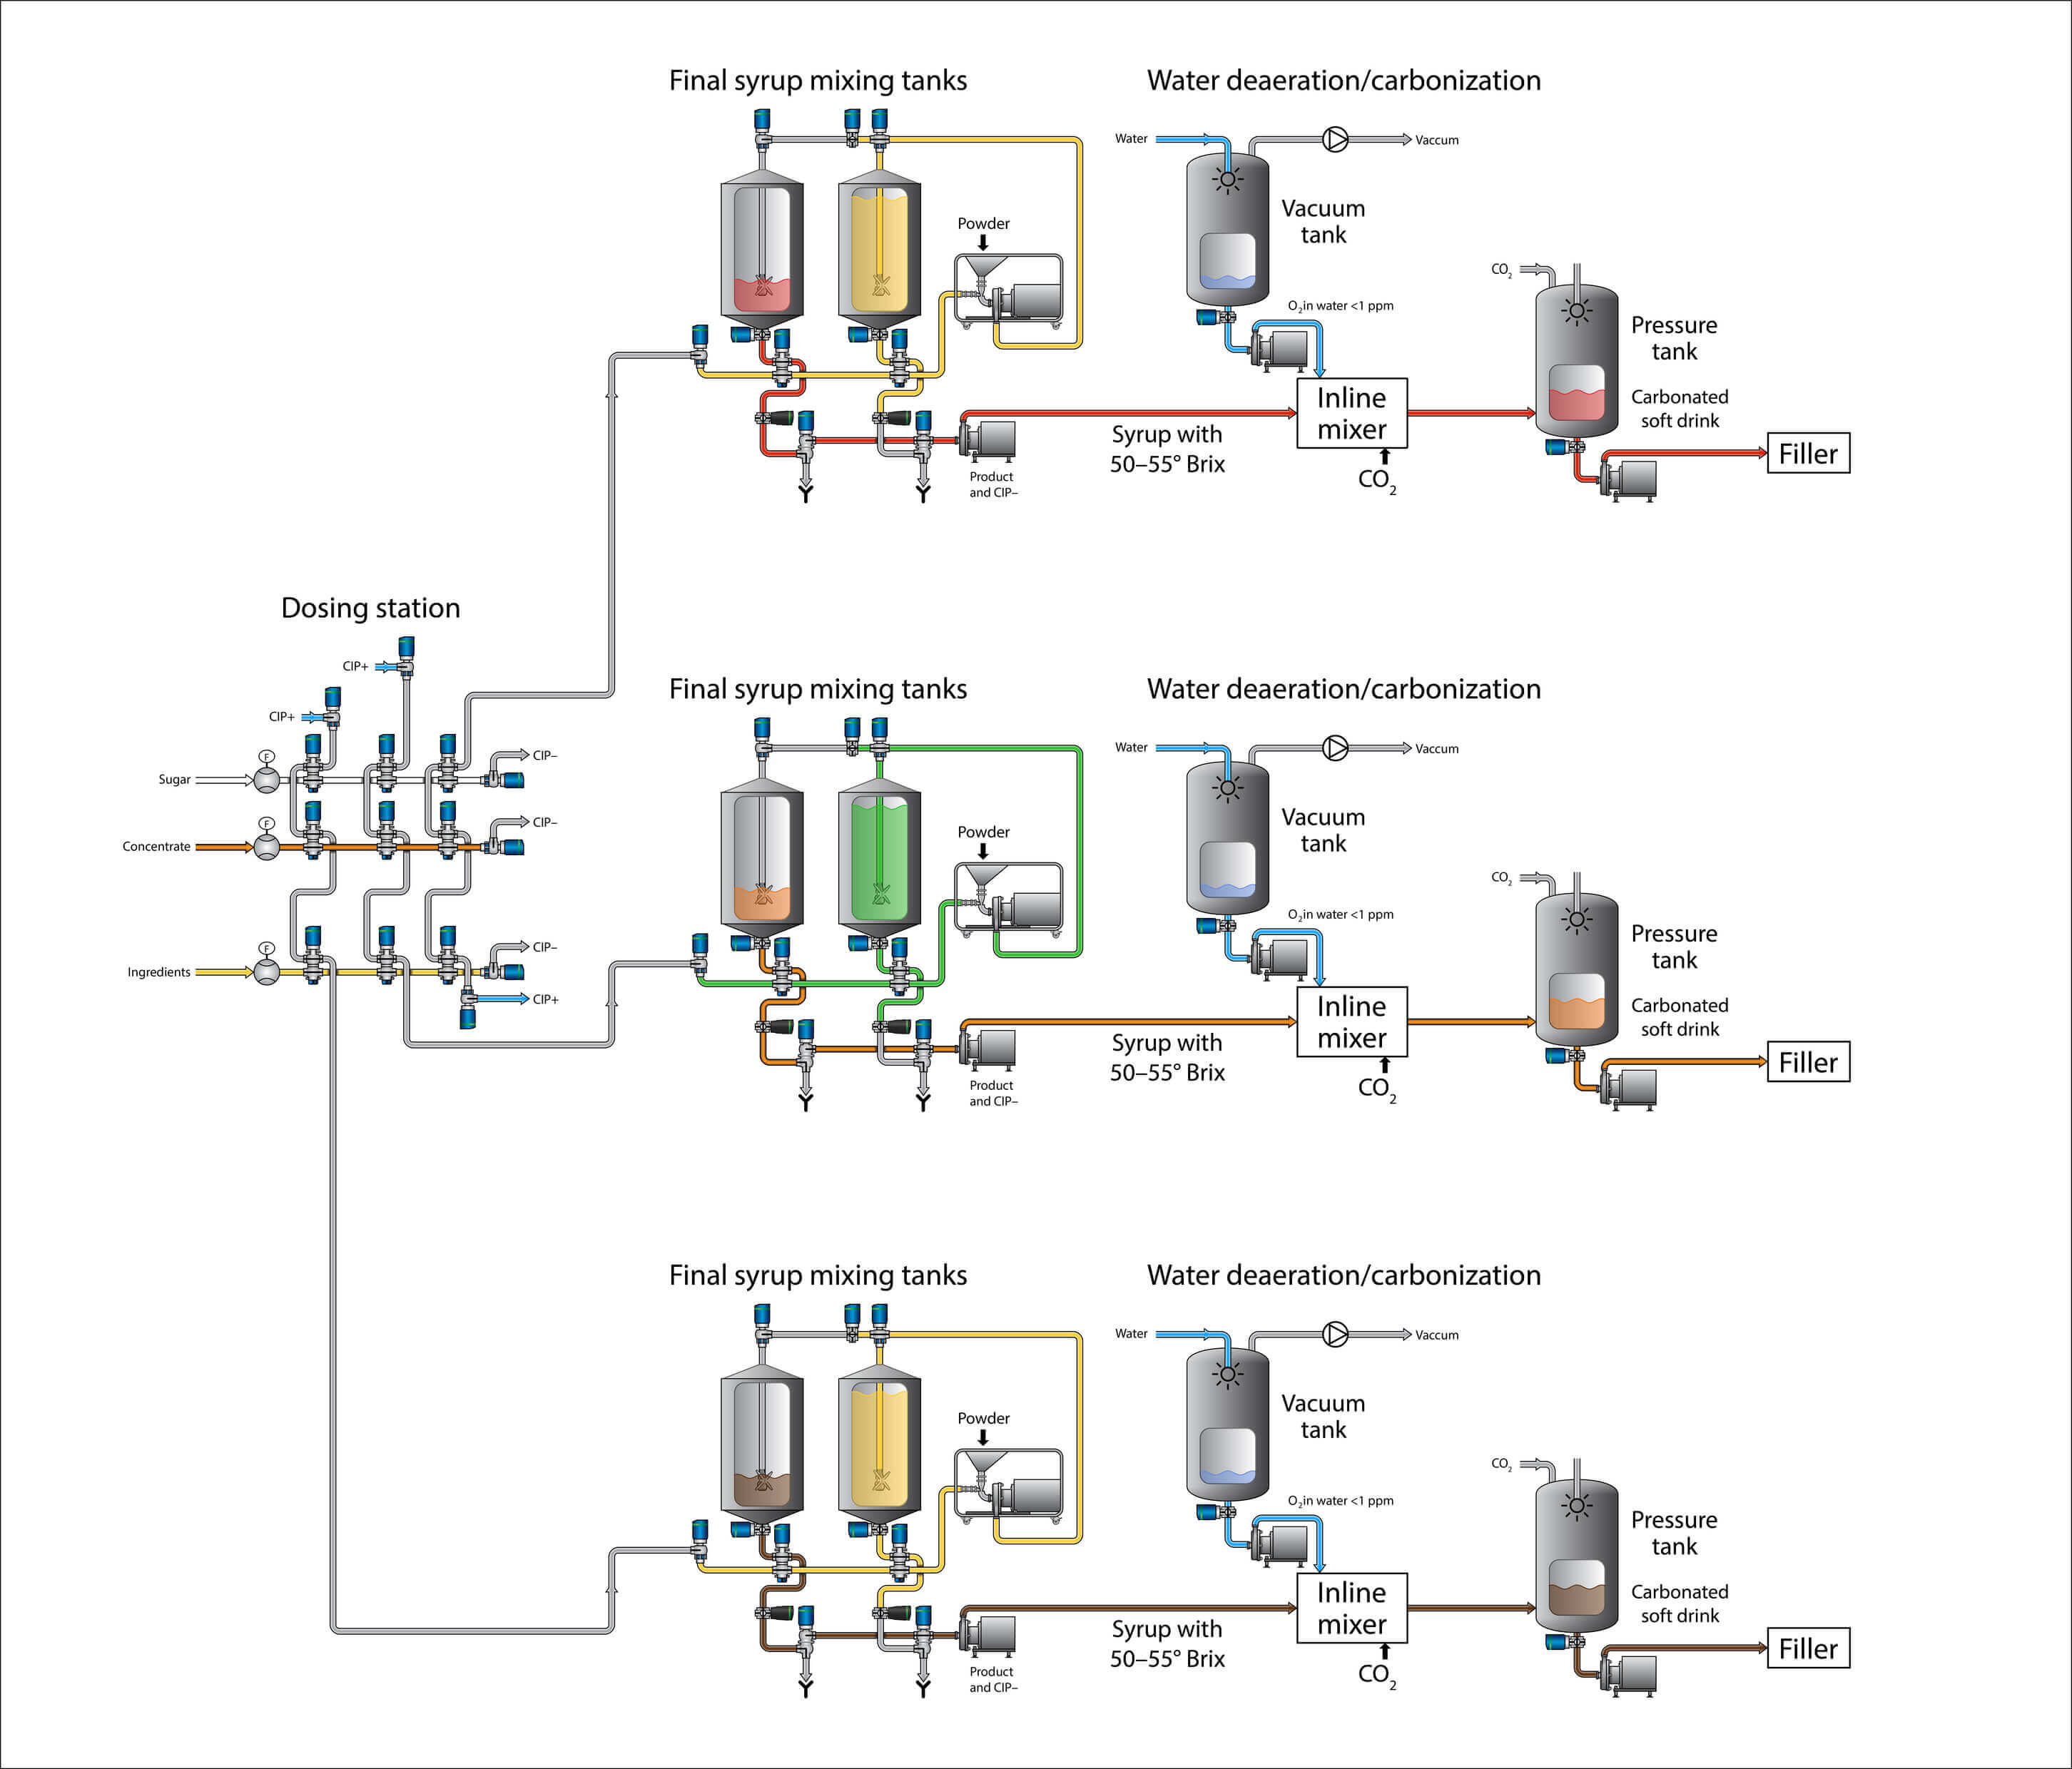 beverage-process-chart_from-dosing-station_fs-2110-.jpeg